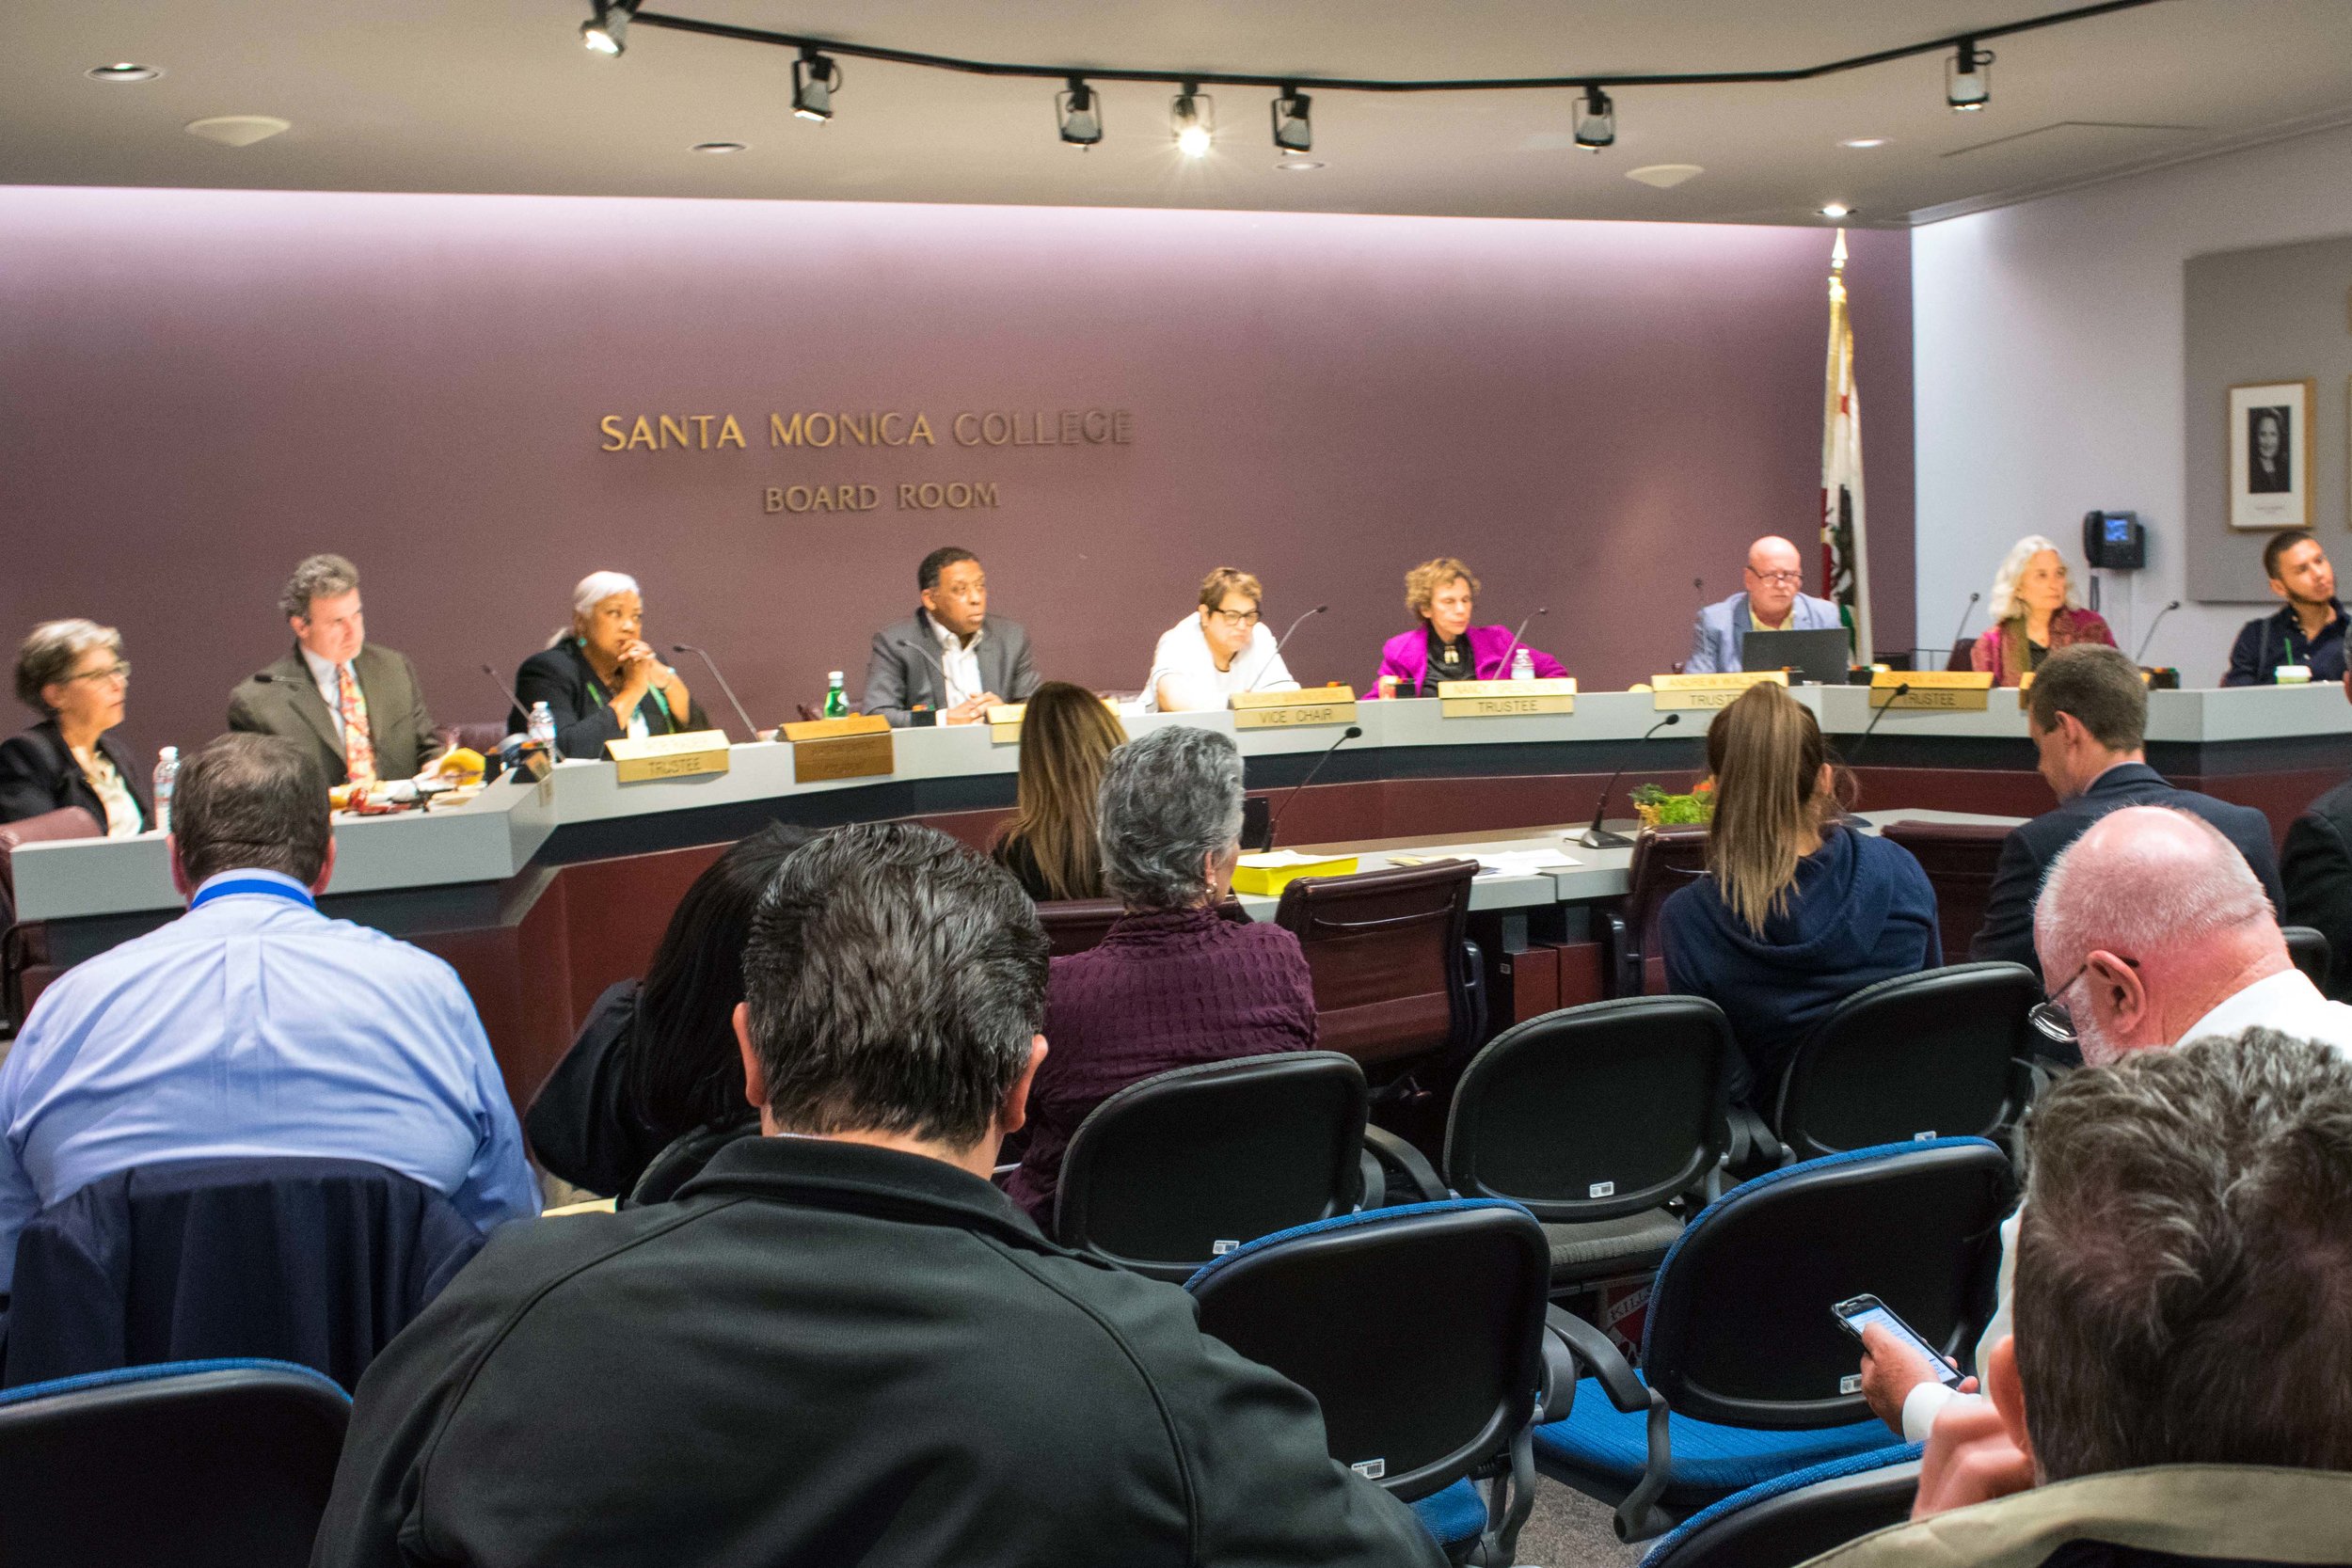  Located within the business building of Santa Monica College, the Board of Trustees meet once a month to go over items in a public meeting on Tuesday, March 6, 2018 in Santa Monica, California. The board, listed from left to right are Trustee Dr. Lo